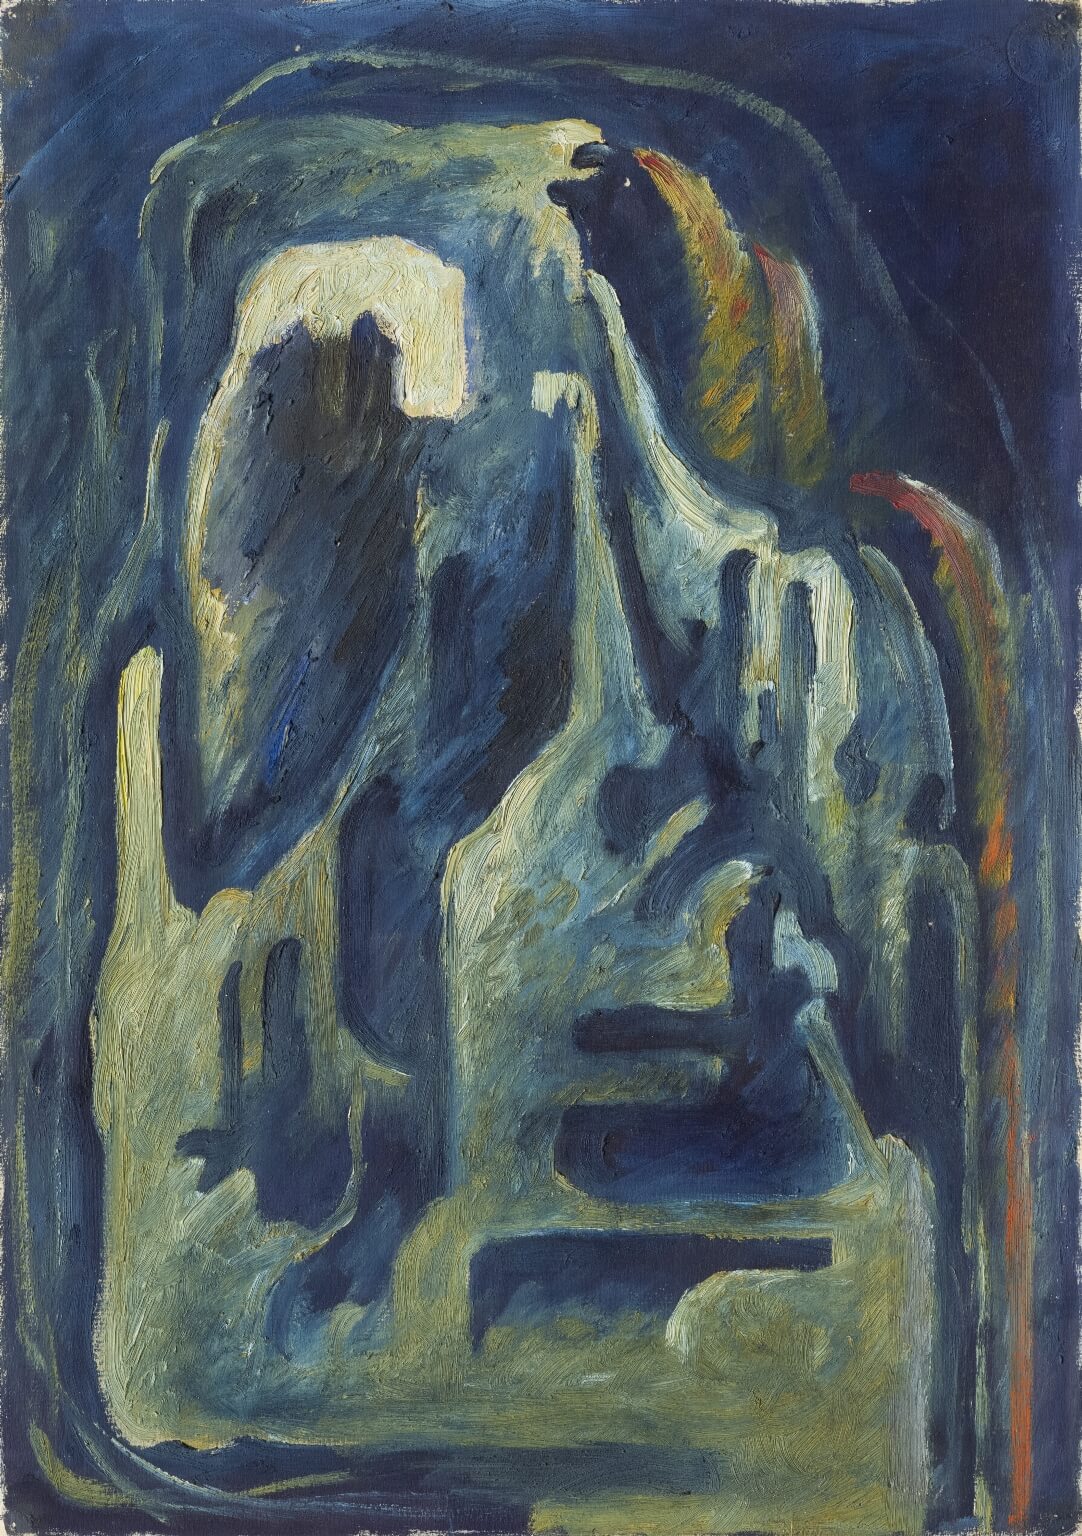 Abstract oil painting on paper of an abstract human-like figure in grayish blue tones, tan, brown, and black